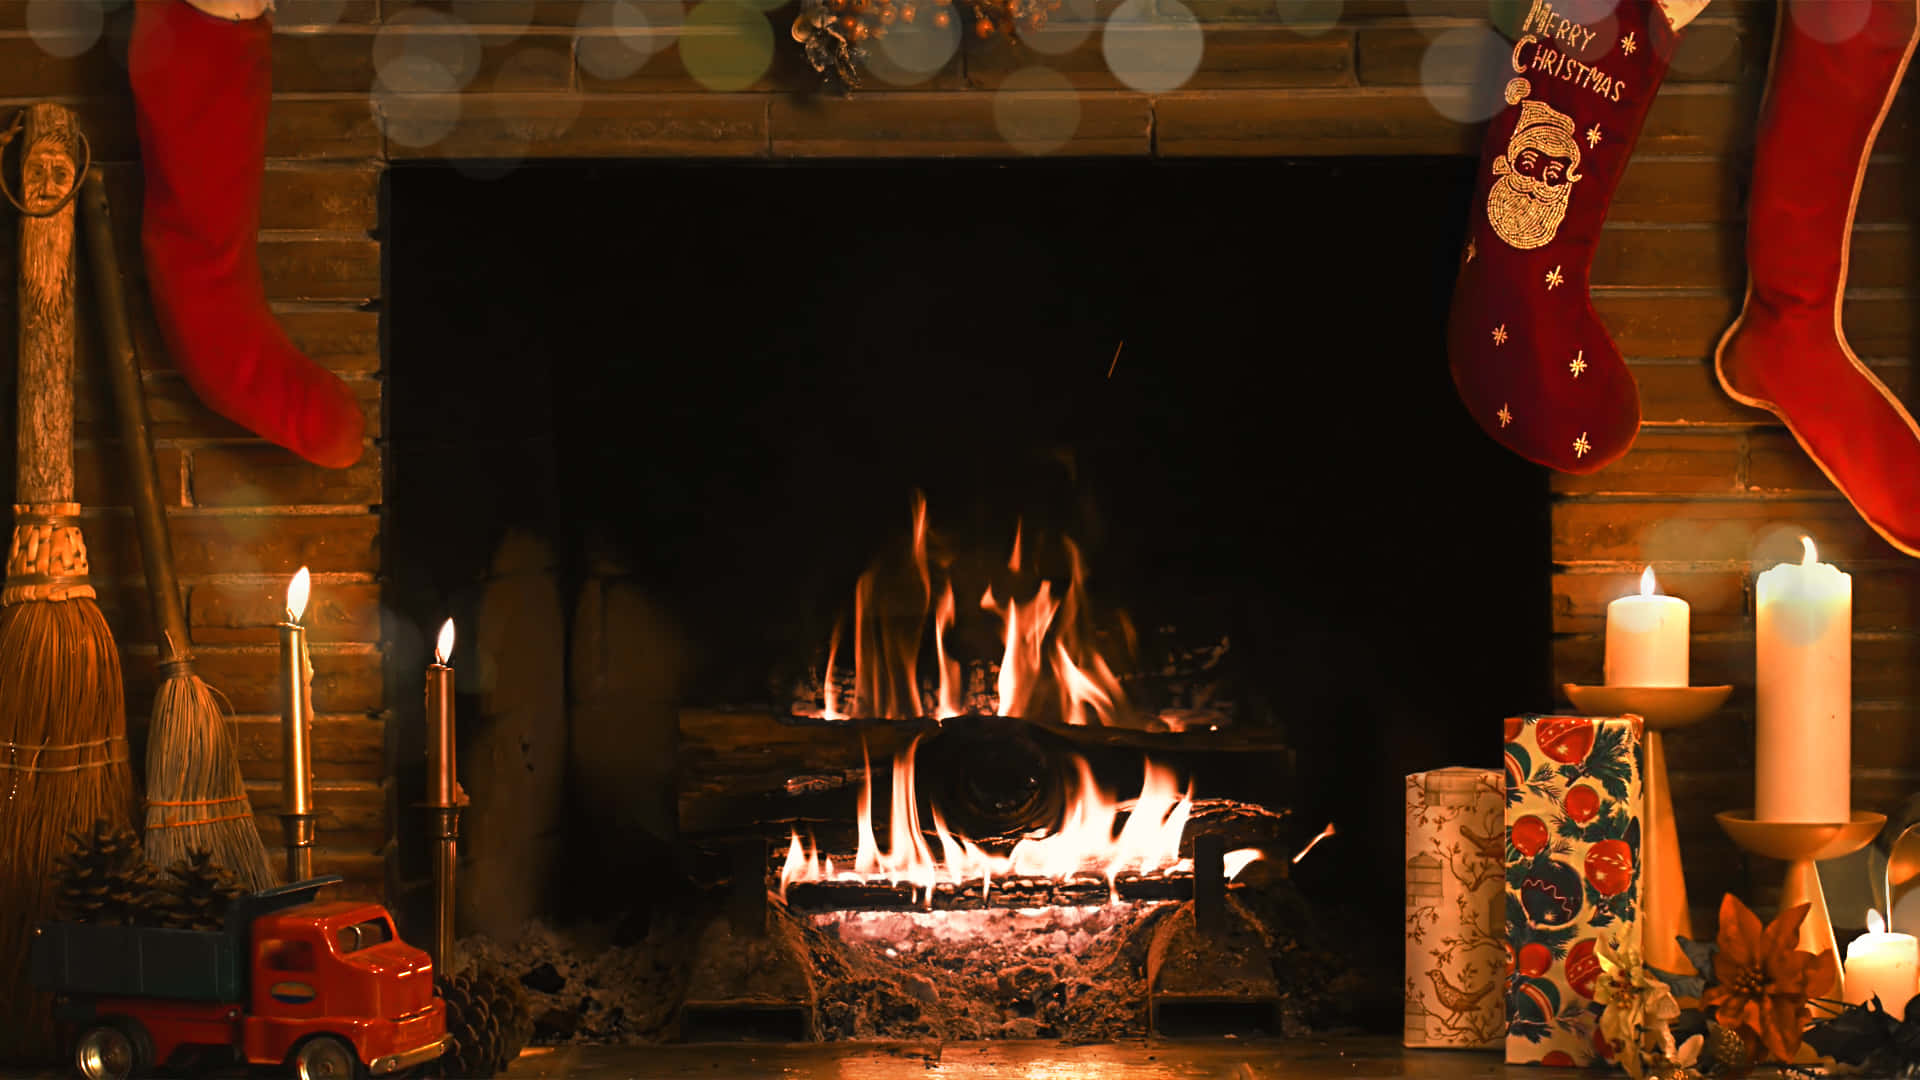 Light up your home with a cozy Fireplace